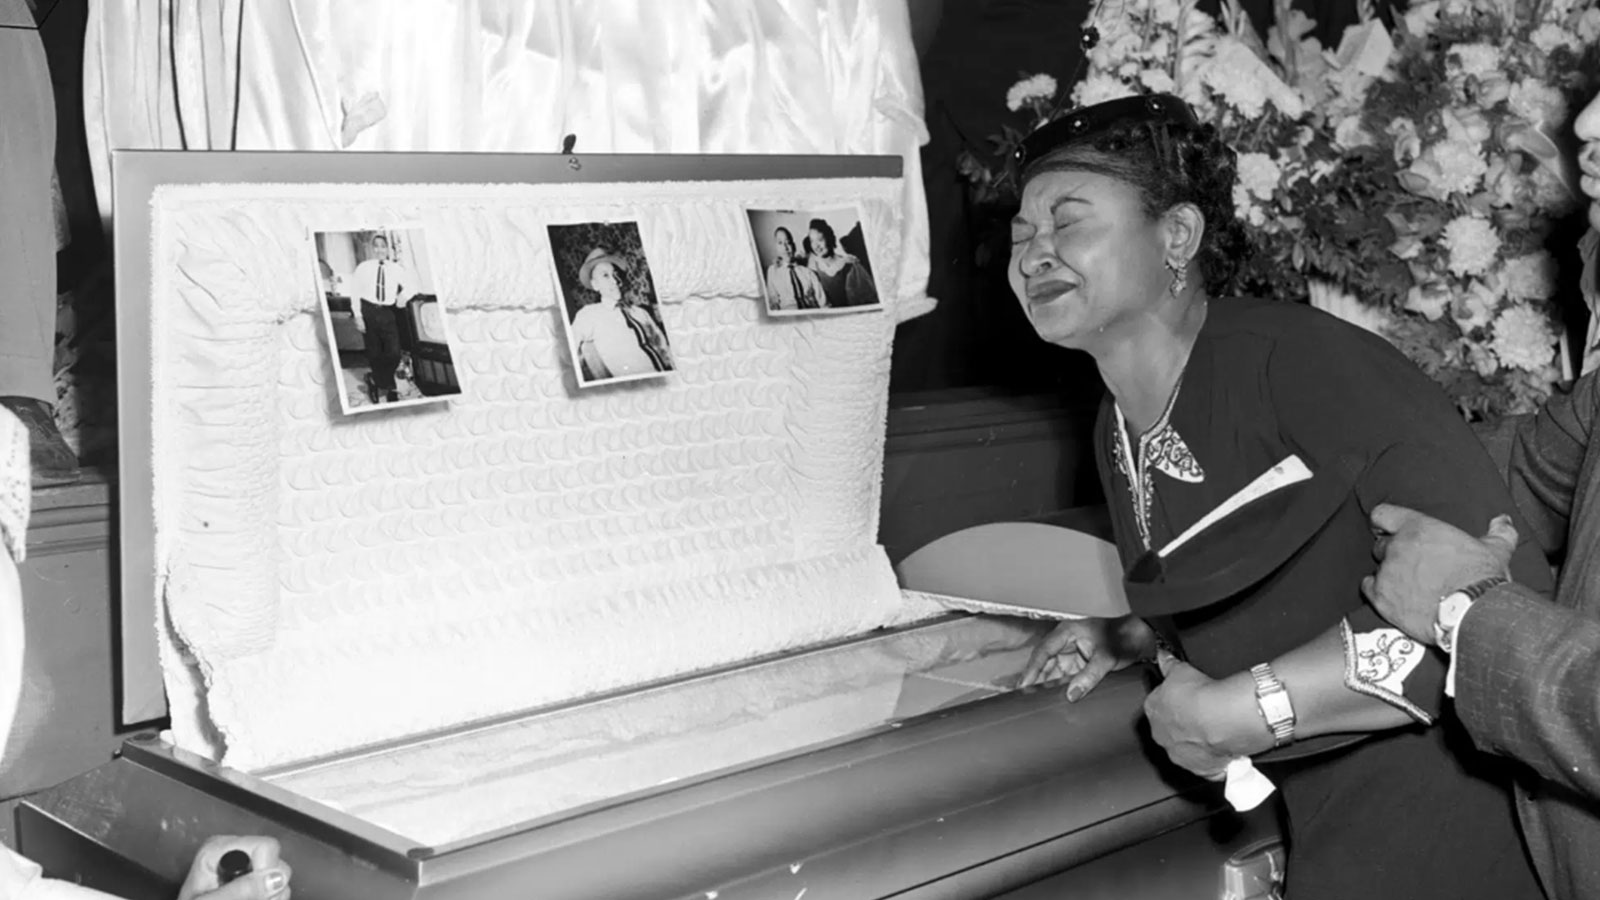 Mamie Till-Mobley weeps at her son's funeral on Sept. 6, 1955, in Chicago. The mother of Emmett Till insisted that her son's body be displayed in an open casket forcing the nation to see the brutality directed at Black people. The funerals of Black Americans who are the victims of police brutality or white supremacist violence serve both as outlets for private mourning and as venues to air shared grief and demand justice. 